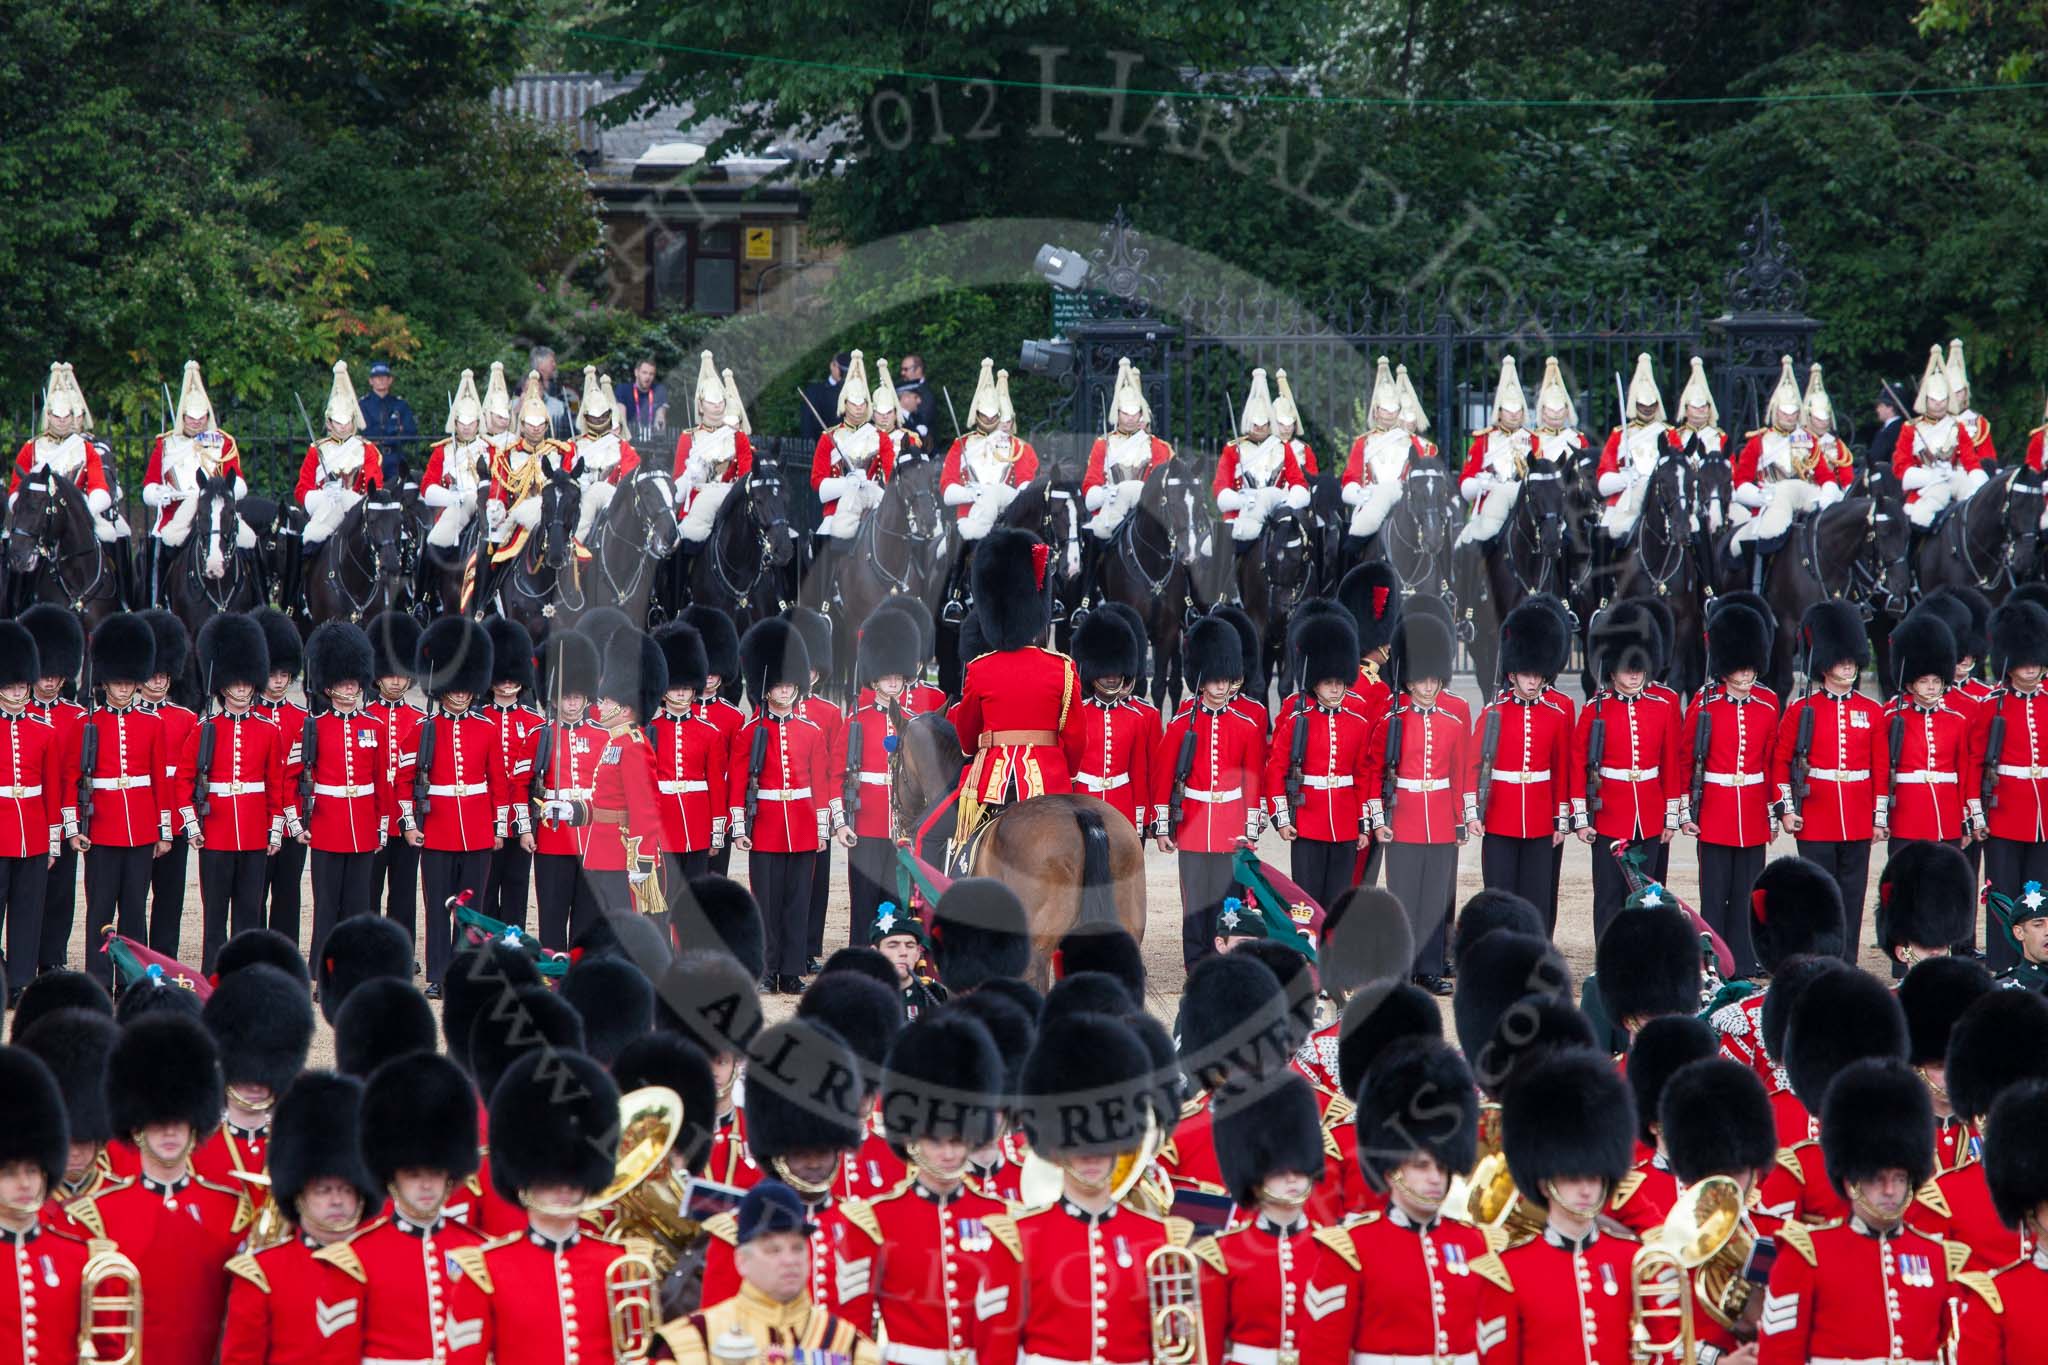 Trooping the Colour 2012: The line of guardsmen has been closed again. In the background The Life Guards on their horses, then the two rows of guardsmen, and in front the Massed Bands..
Horse Guards Parade, Westminster,
London SW1,

United Kingdom,
on 16 June 2012 at 11:50, image #518